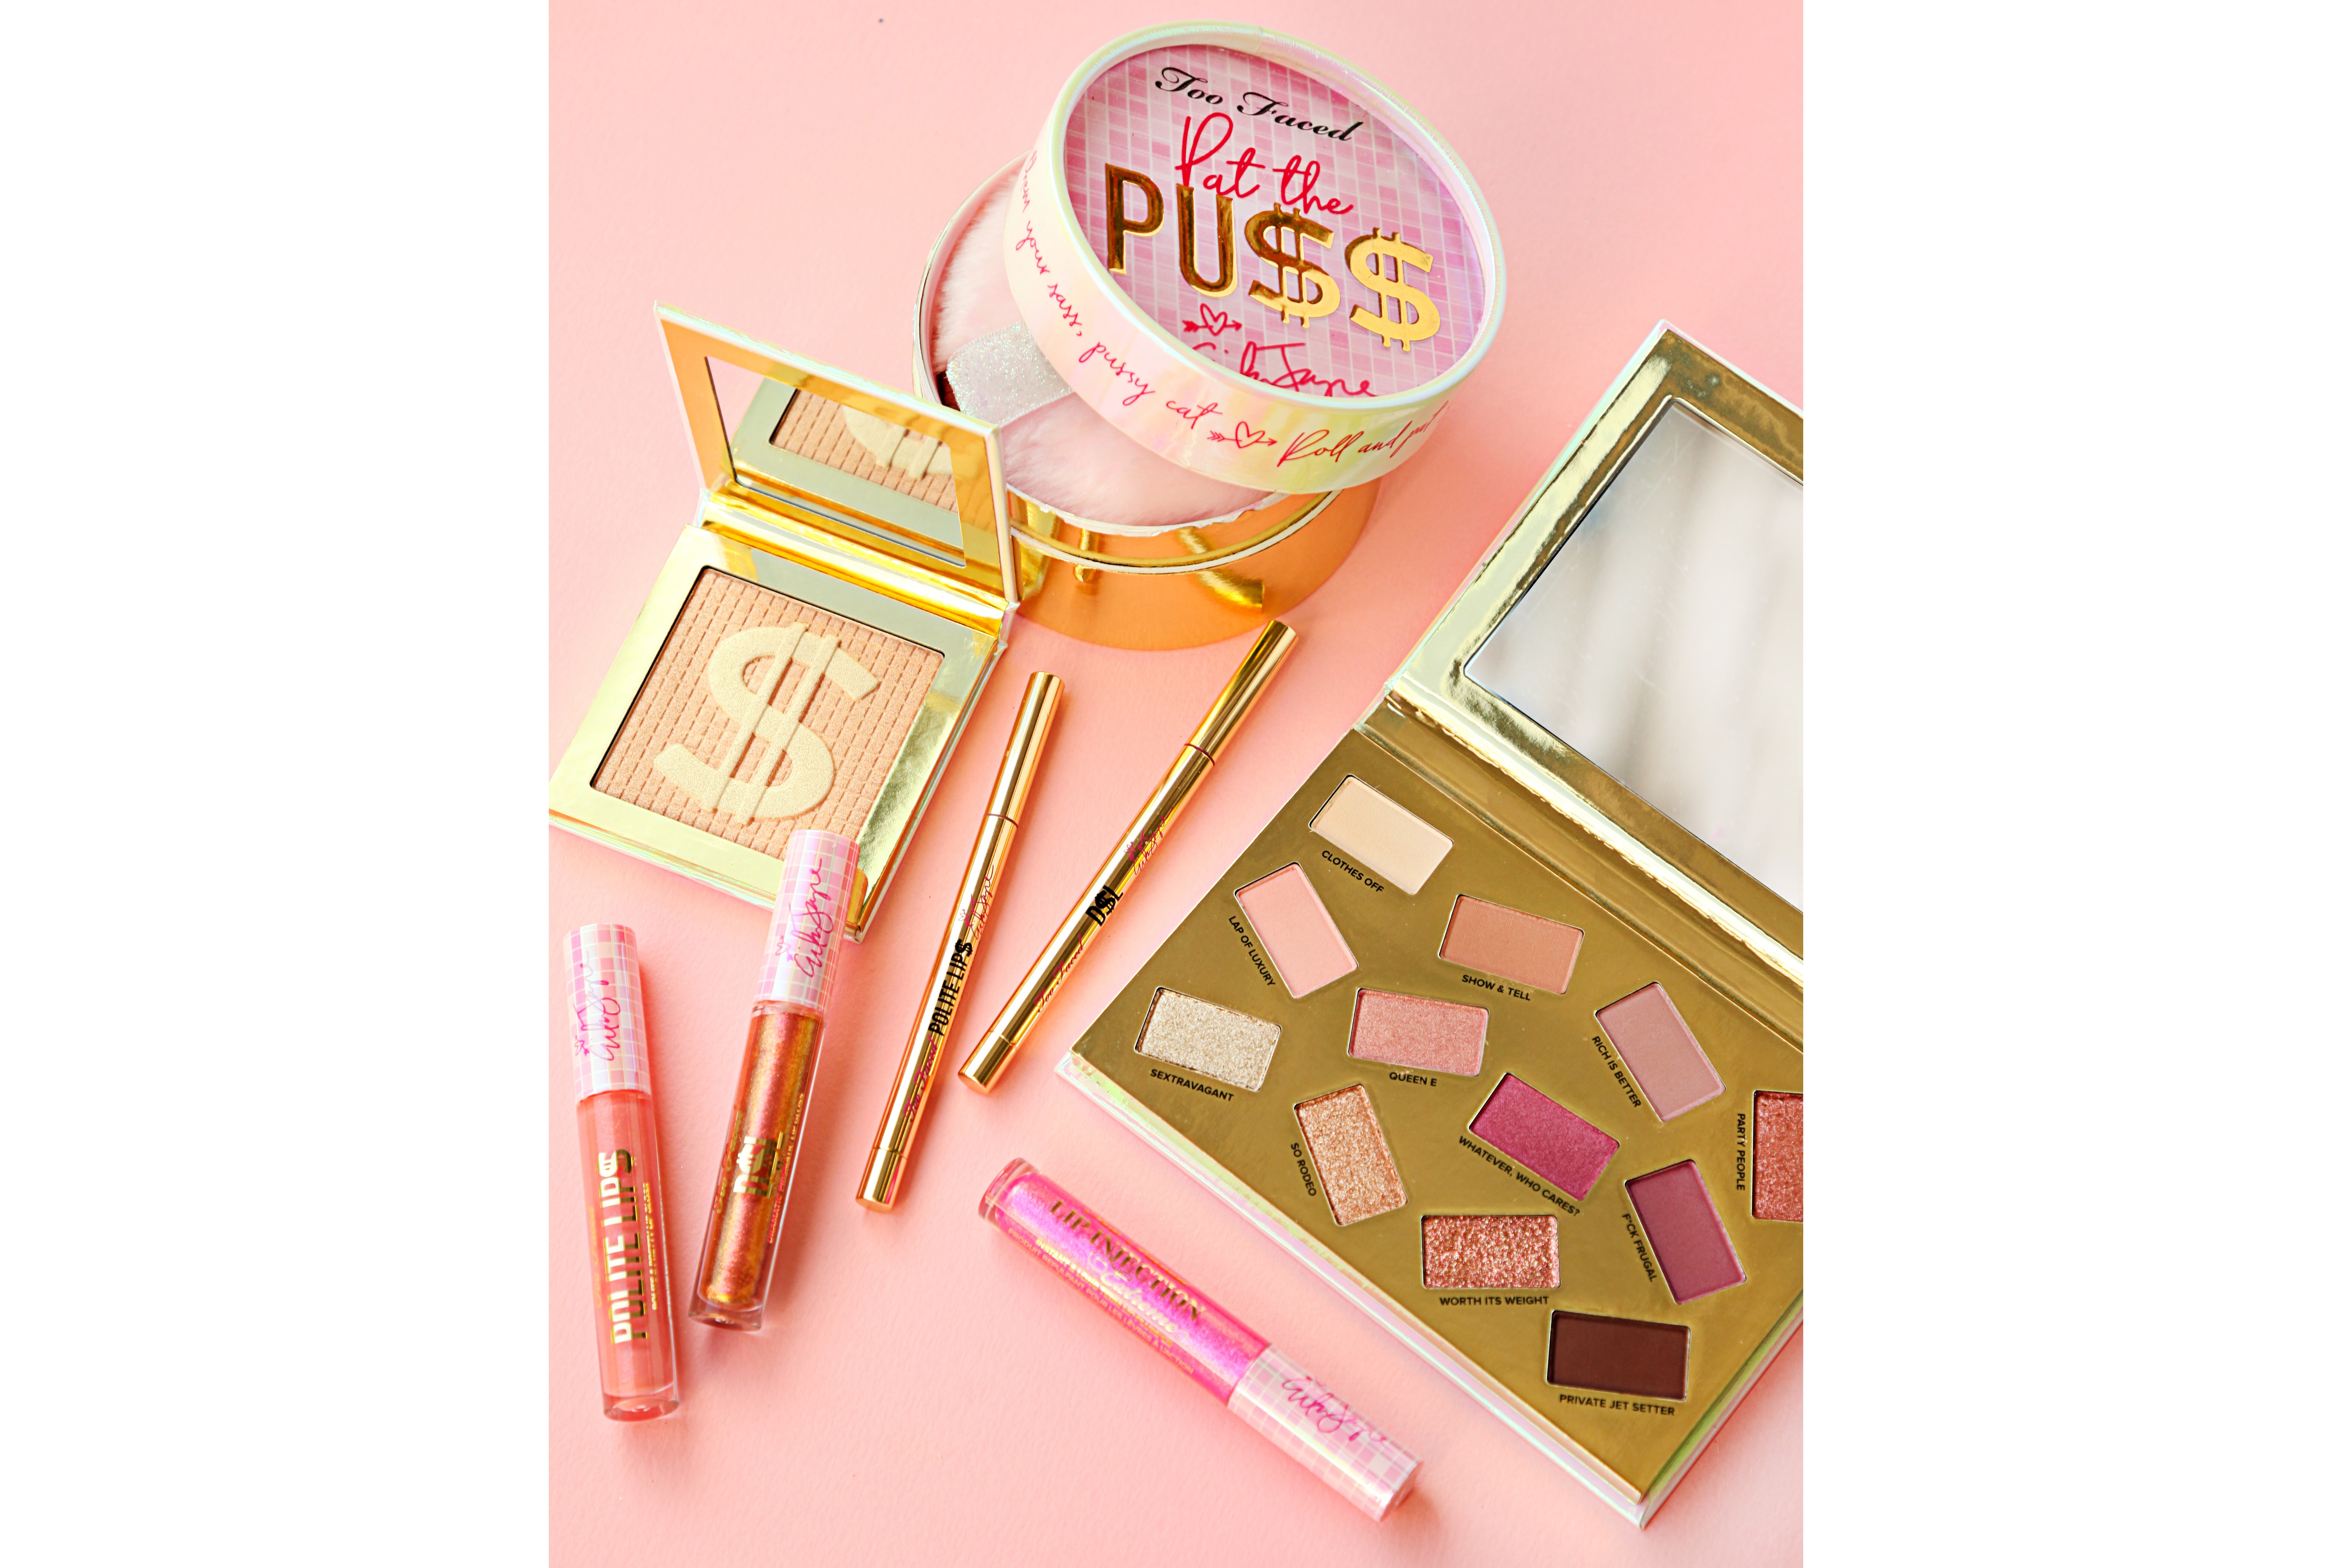 Too Faced "Pretty Mess" Makeup Collection Erika Jayne Real Housewives of Beverly Hills Beauty Range Cosmetics Lip Plumper Lip Injection Eyeshadow Palette Release